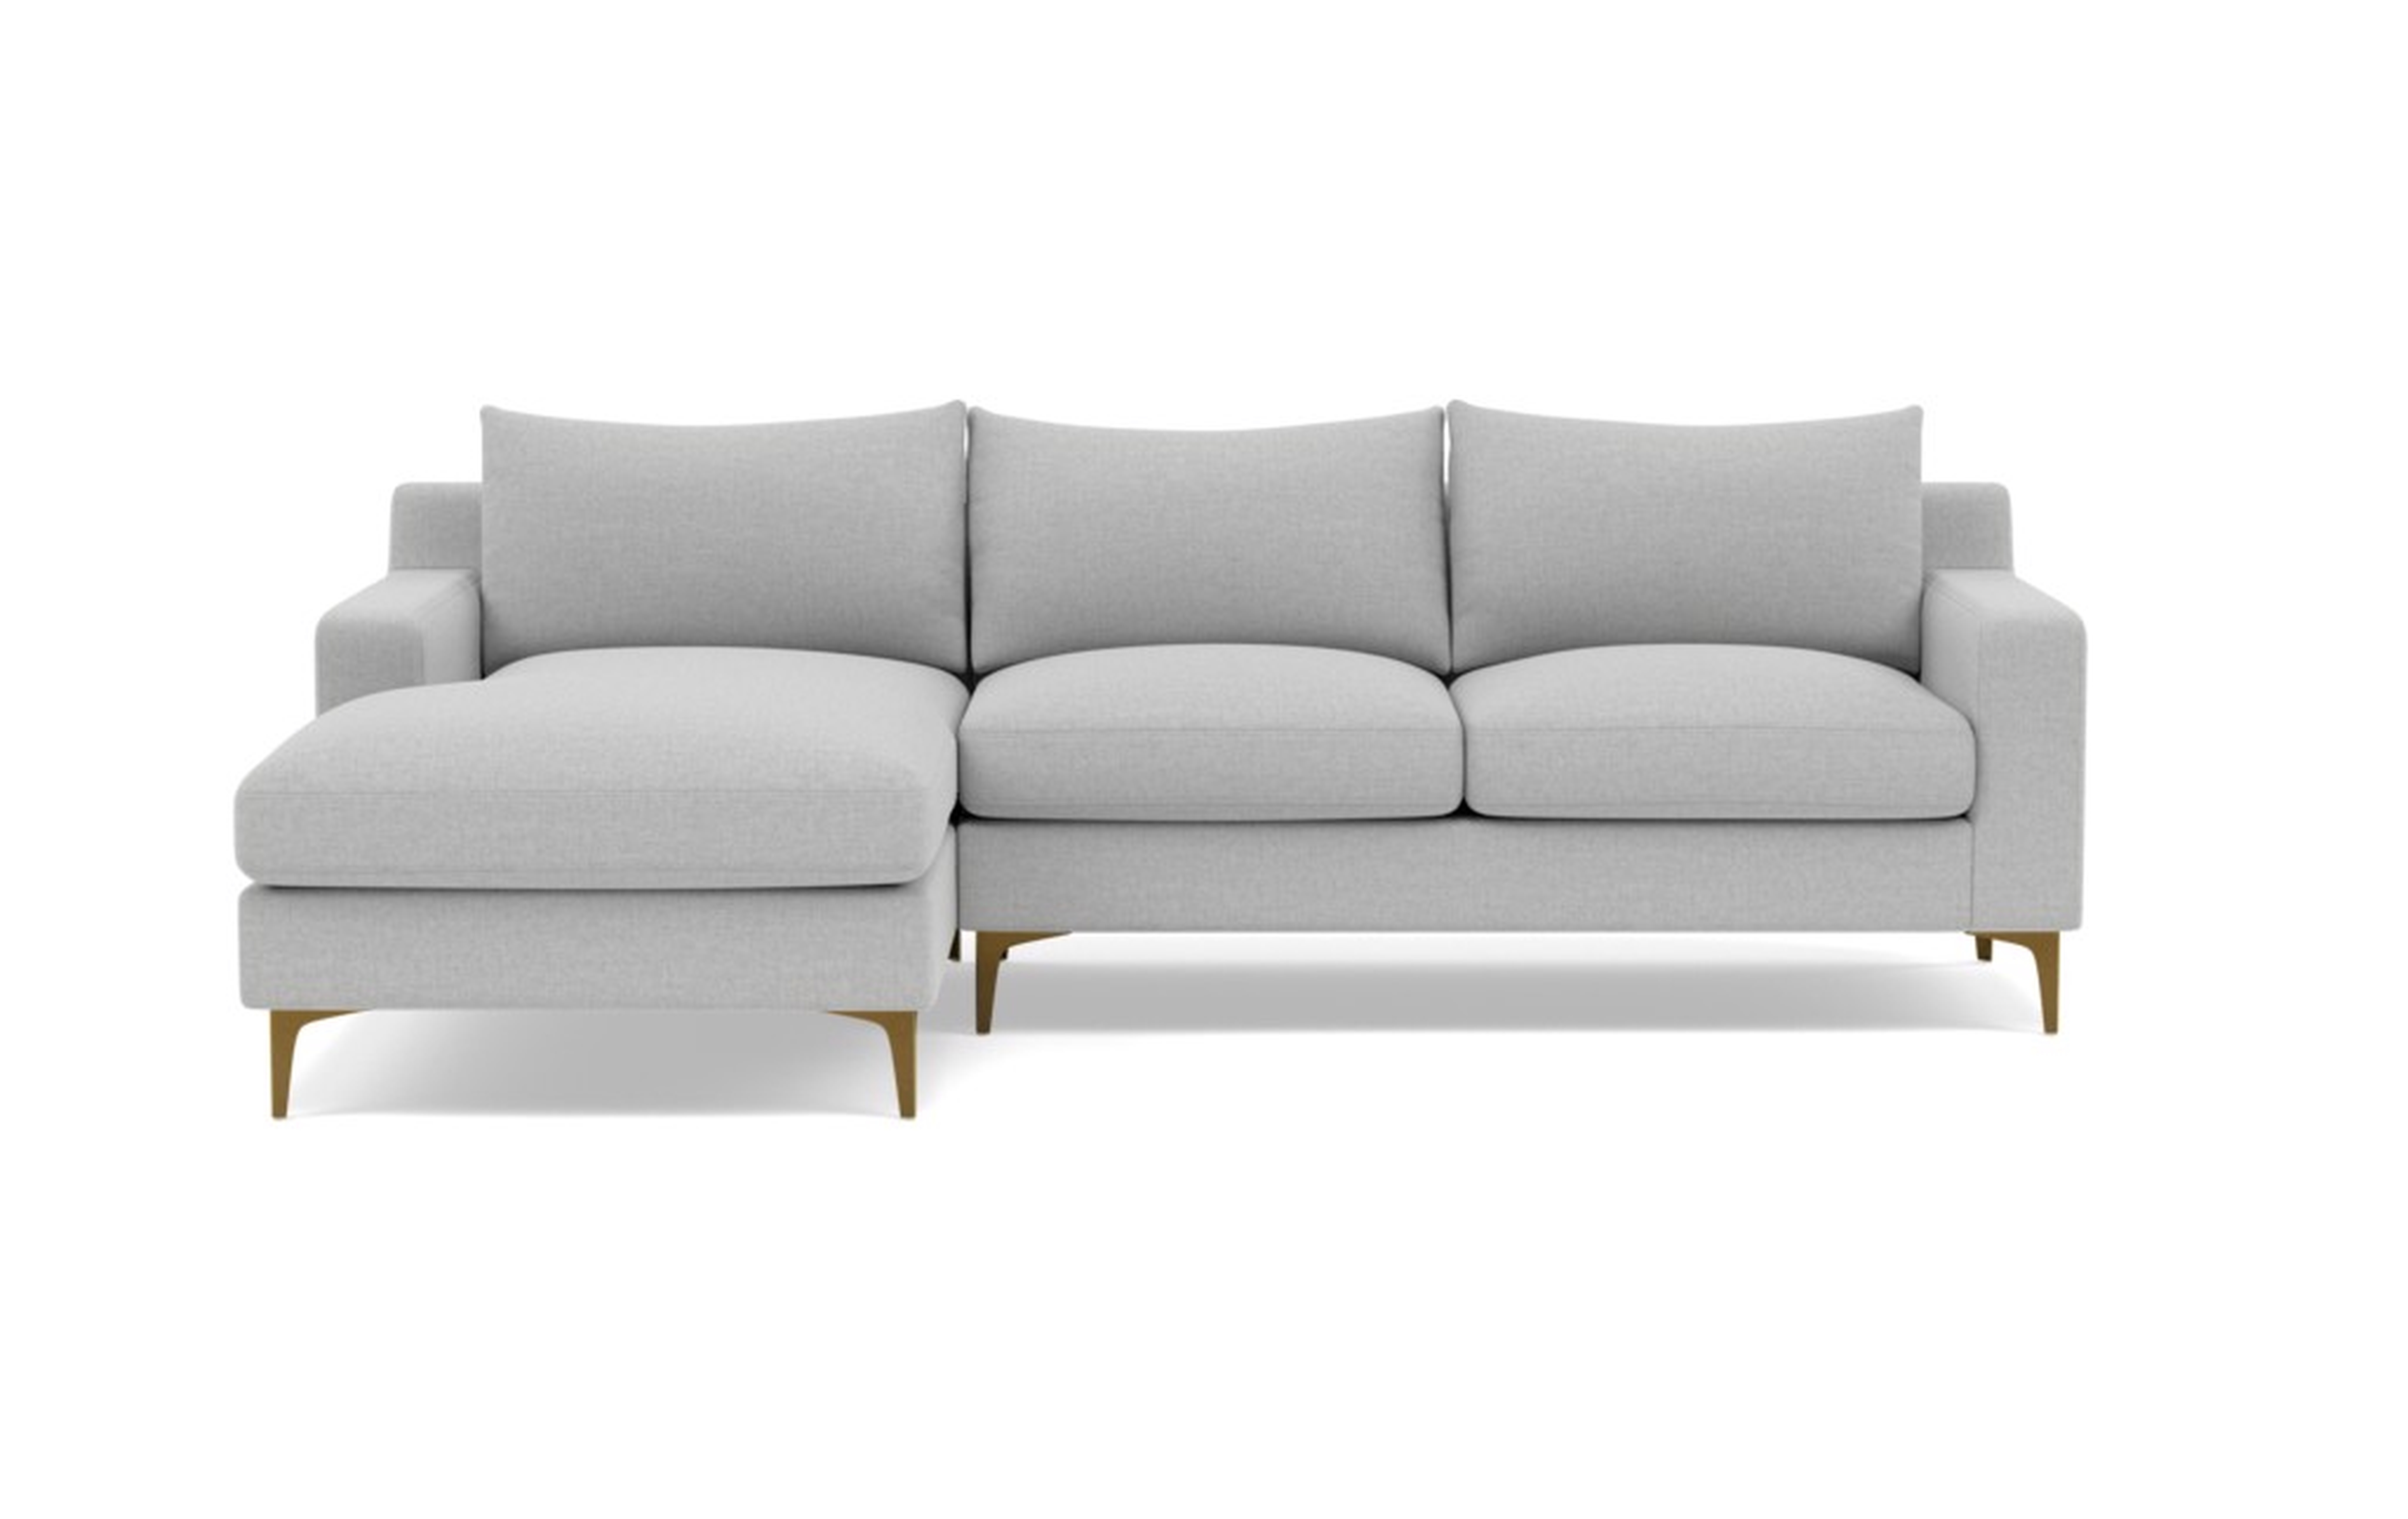 SLOAN Sectional Sofa with Left Chaise, Ecru, Brass Plated Sloan Leg, 92" - Interior Define